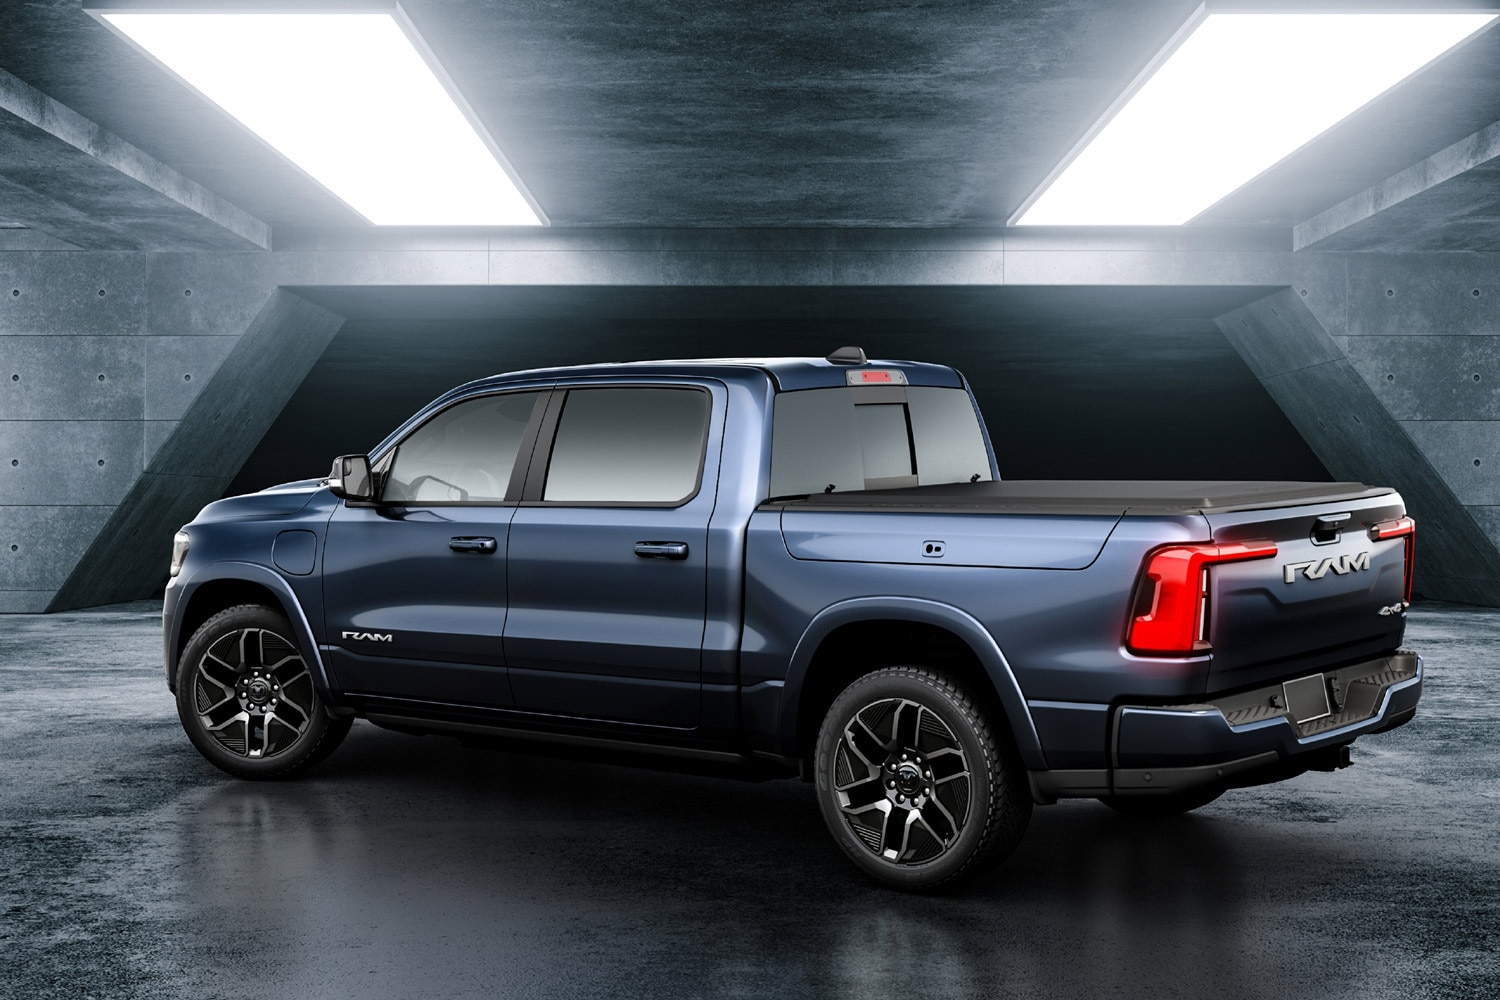 2025 Ram 1500 Revolution Electric Truck Concept Preview